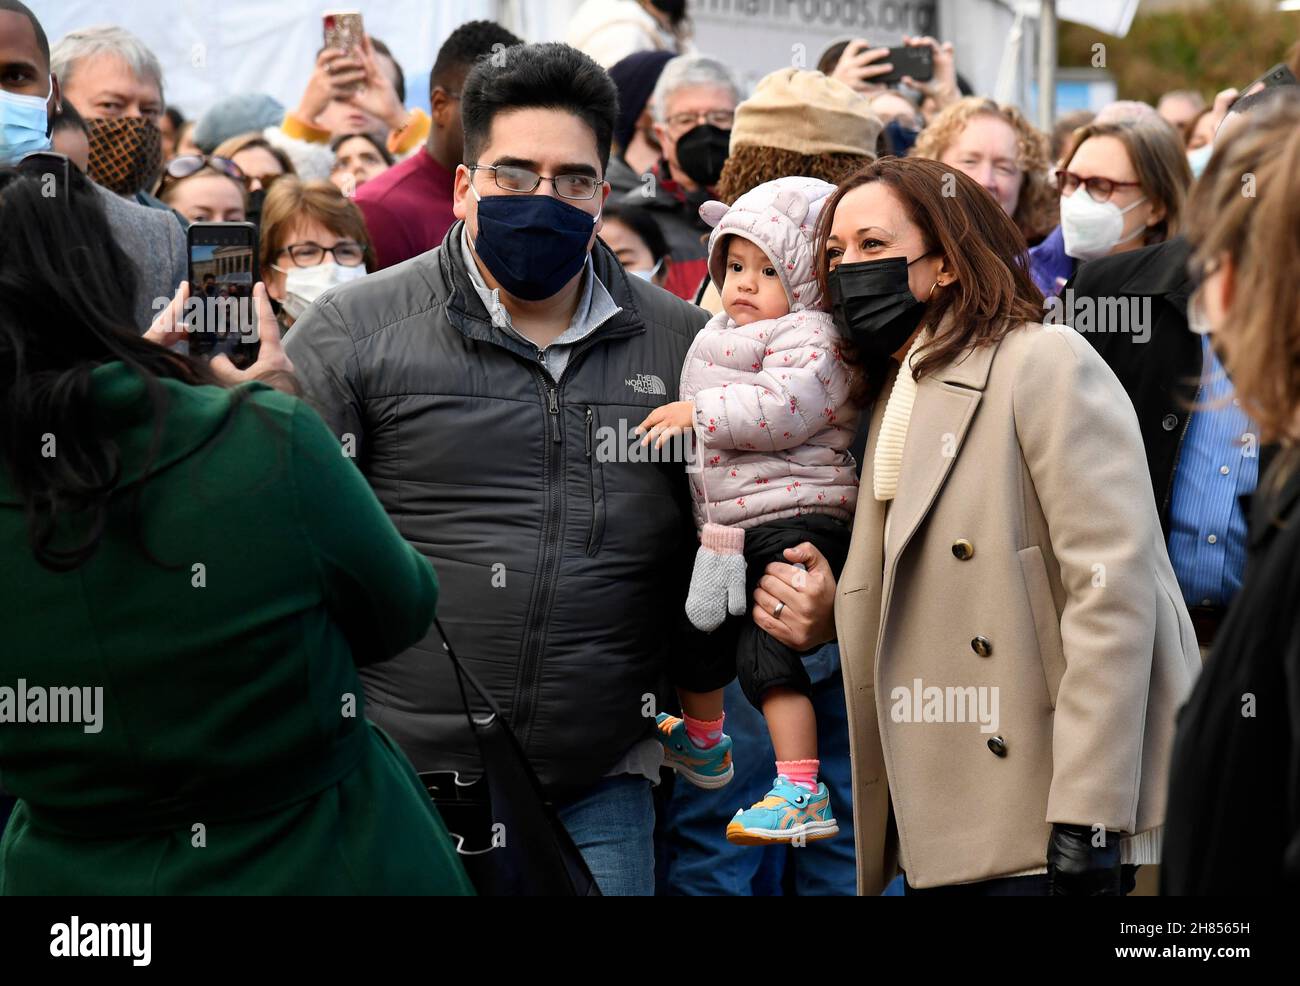 Washington, United States. 28th Nov, 2021. Vice President Kamala Harris (R) has her photo taken with a toddler and family as she concludes her support for Small Business Saturday with a visit to an outdoor Christmas market, Saturday, November 27, 2021, in Washington, DC. ISP POOL PHOTO via Mike Theiler/Pool/Sipa USA Credit: Sipa USA/Alamy Live News Stock Photo